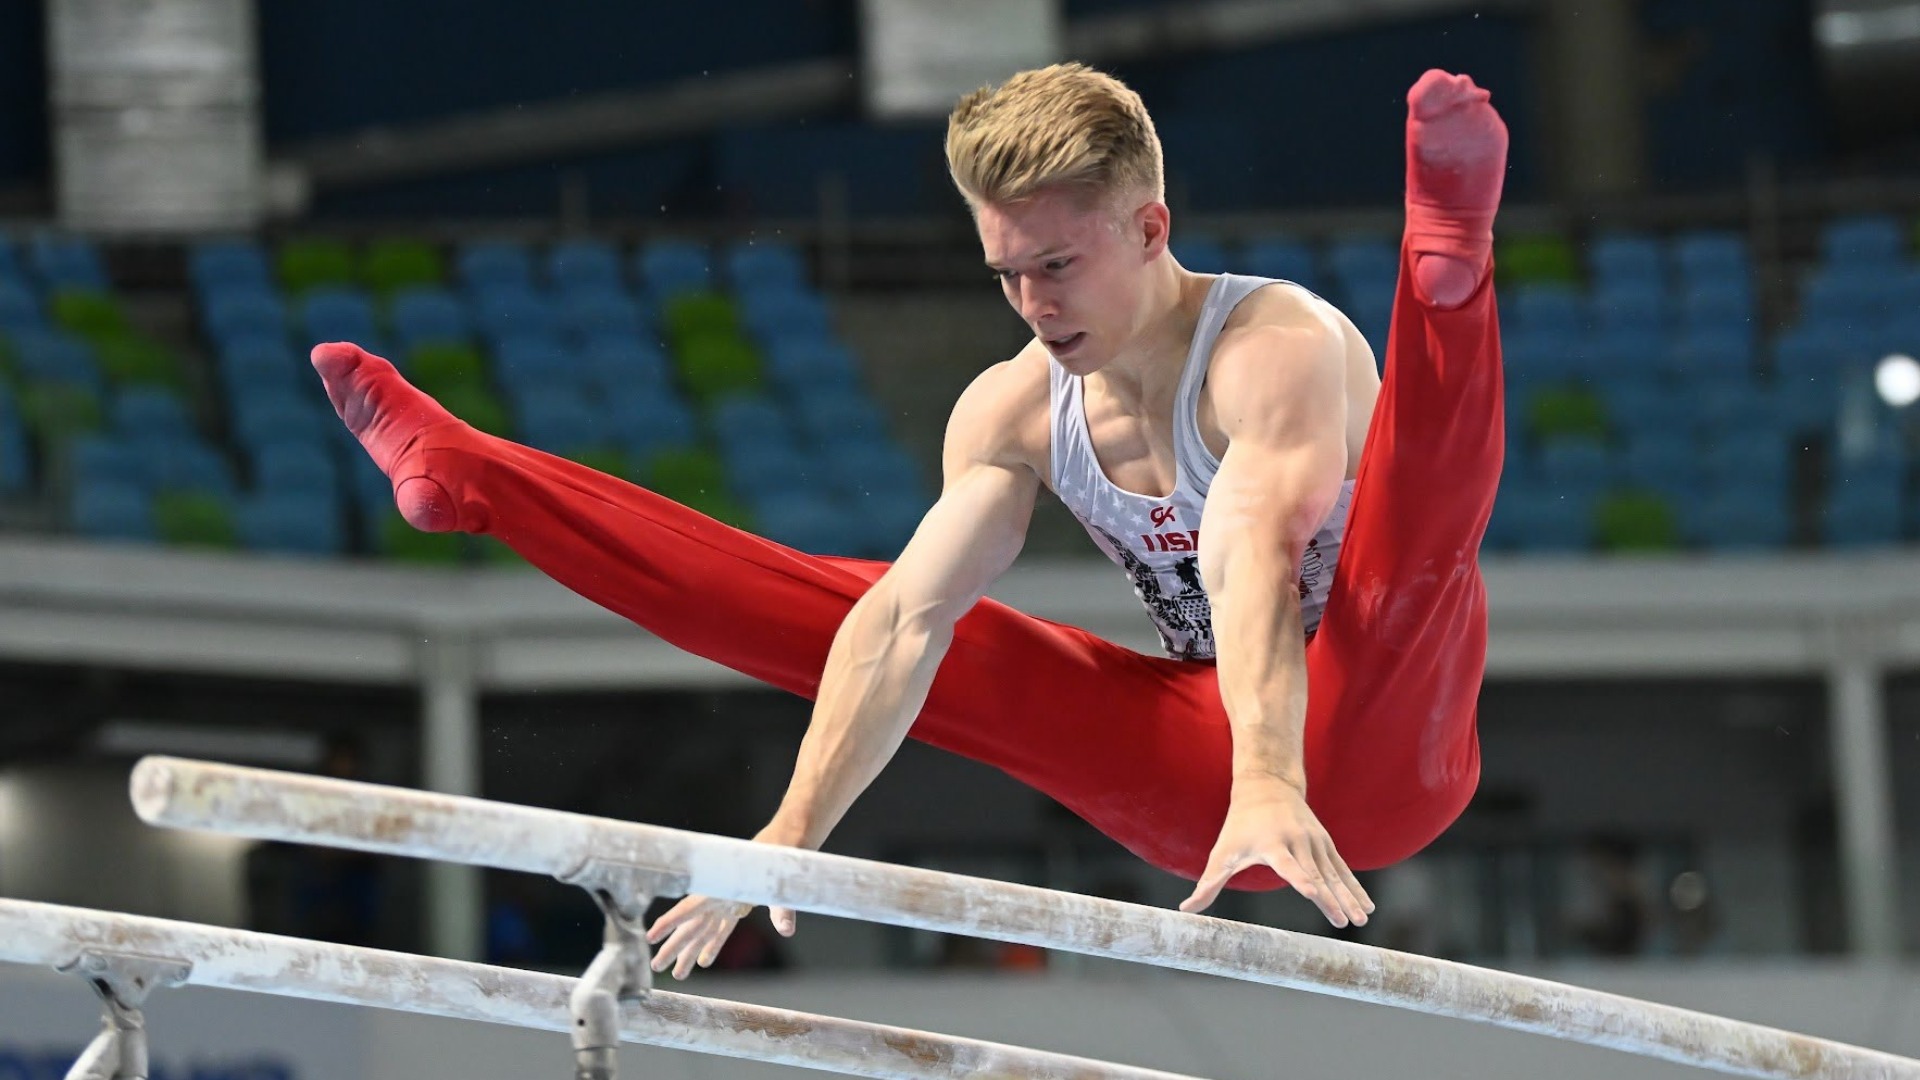 Shane Wiskus compete on parallel bars at the 2022 Pan American Championships.